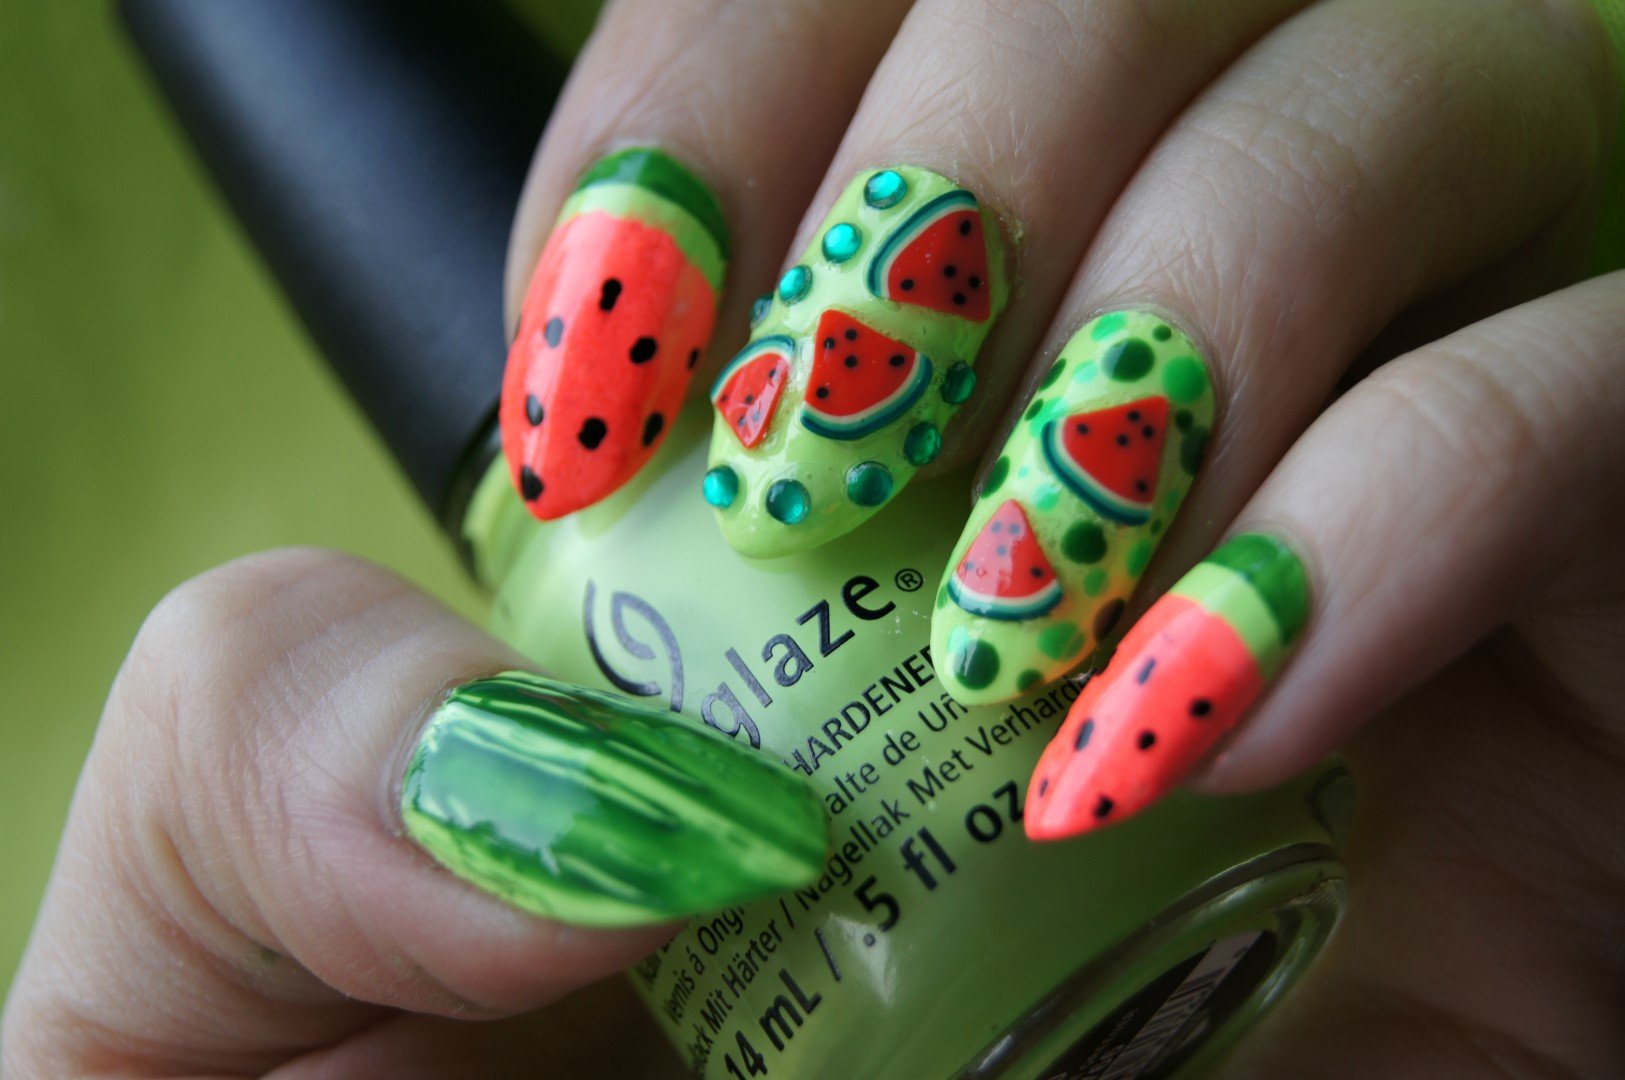 5. Watermelon Nail Designs for a Sweet Summer Manicure - wide 8